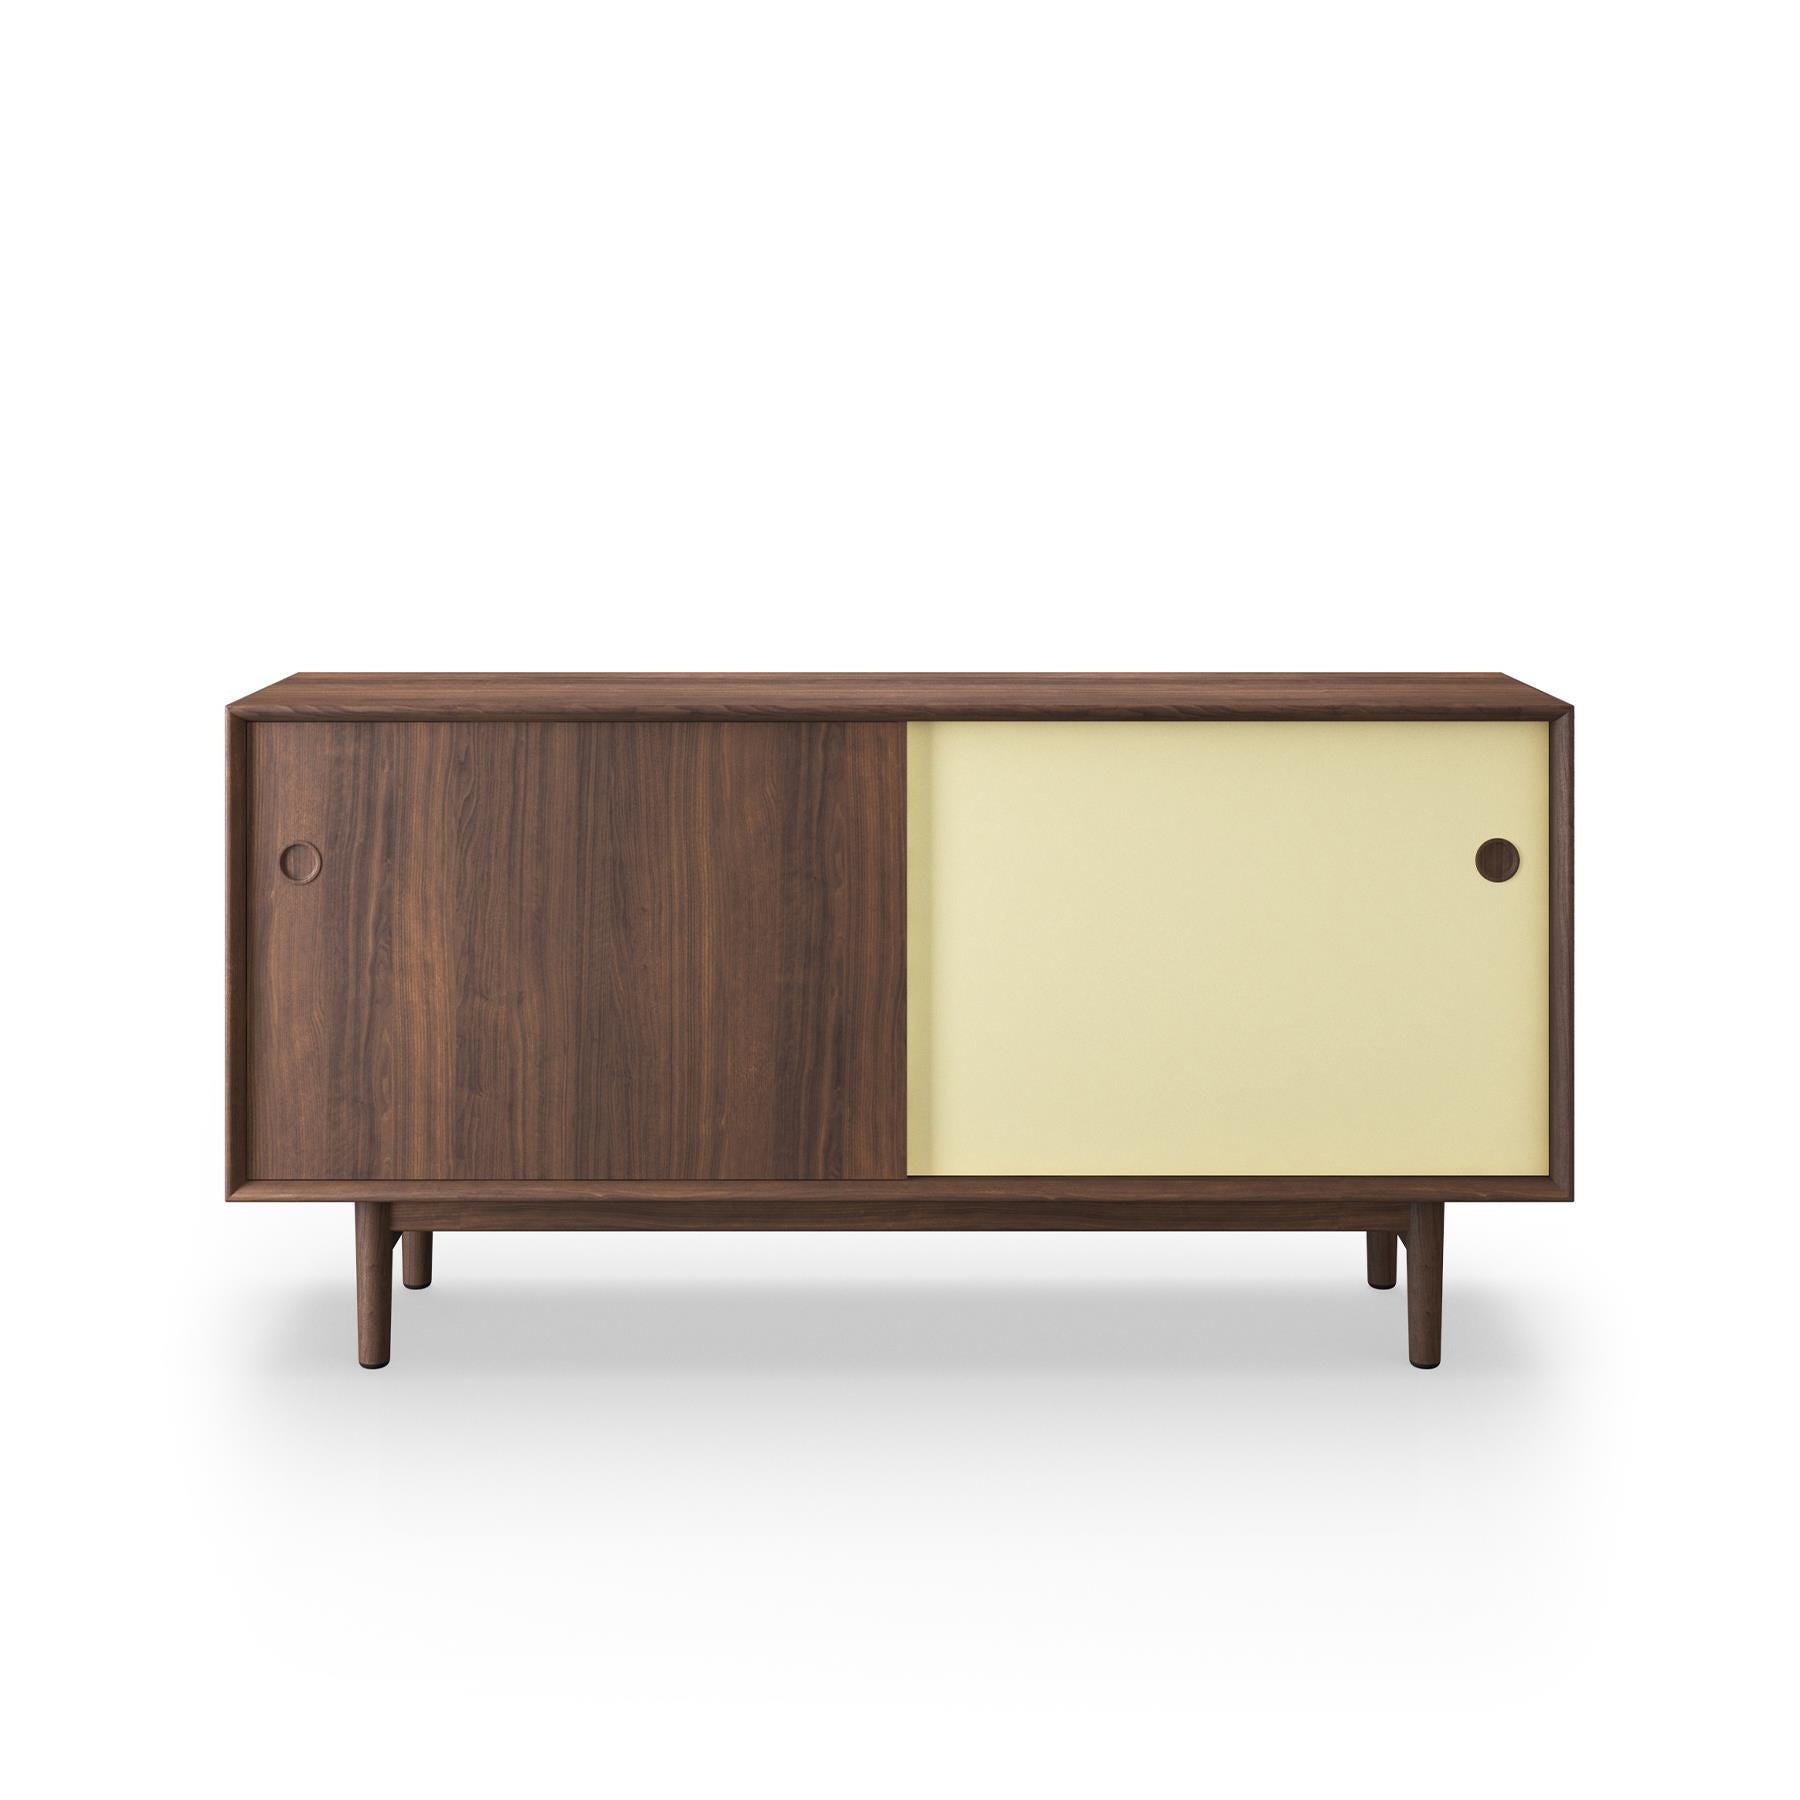 Sibast No 11 Sideboard Walnut Yellow And Natural Front Wooden Legs Dark Wood Designer Furniture From Holloways Of Ludlow